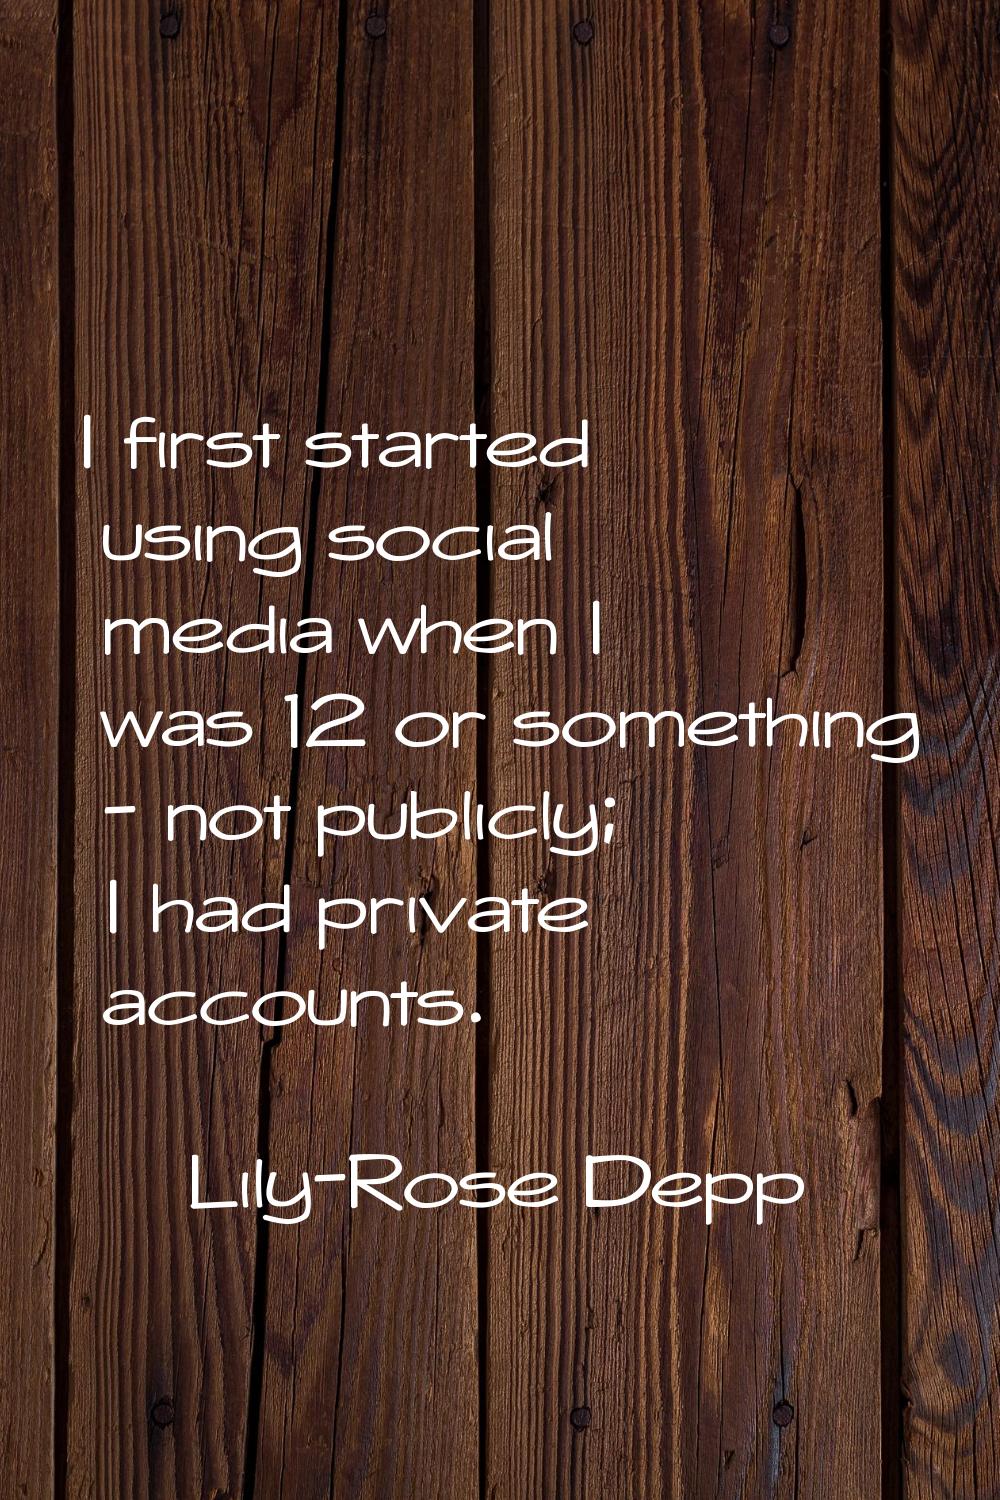 I first started using social media when I was 12 or something - not publicly; I had private account